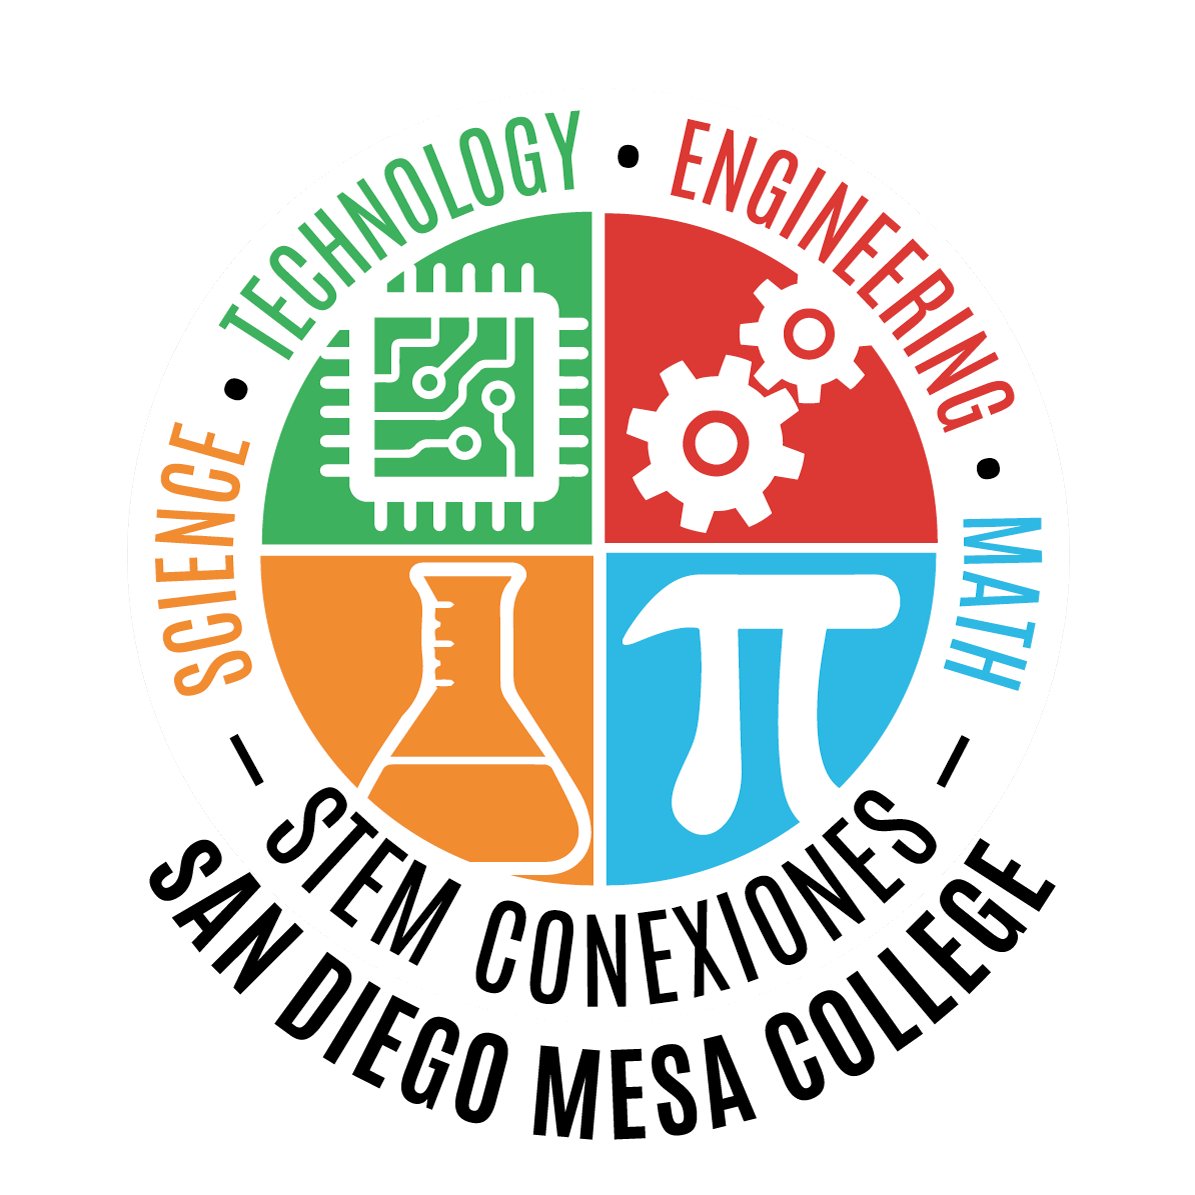 Launched in 2017, STEM Conexiones seeks to increase the percentage of full-time Hispanic, and low-income students seeking a degree in a STEM field.